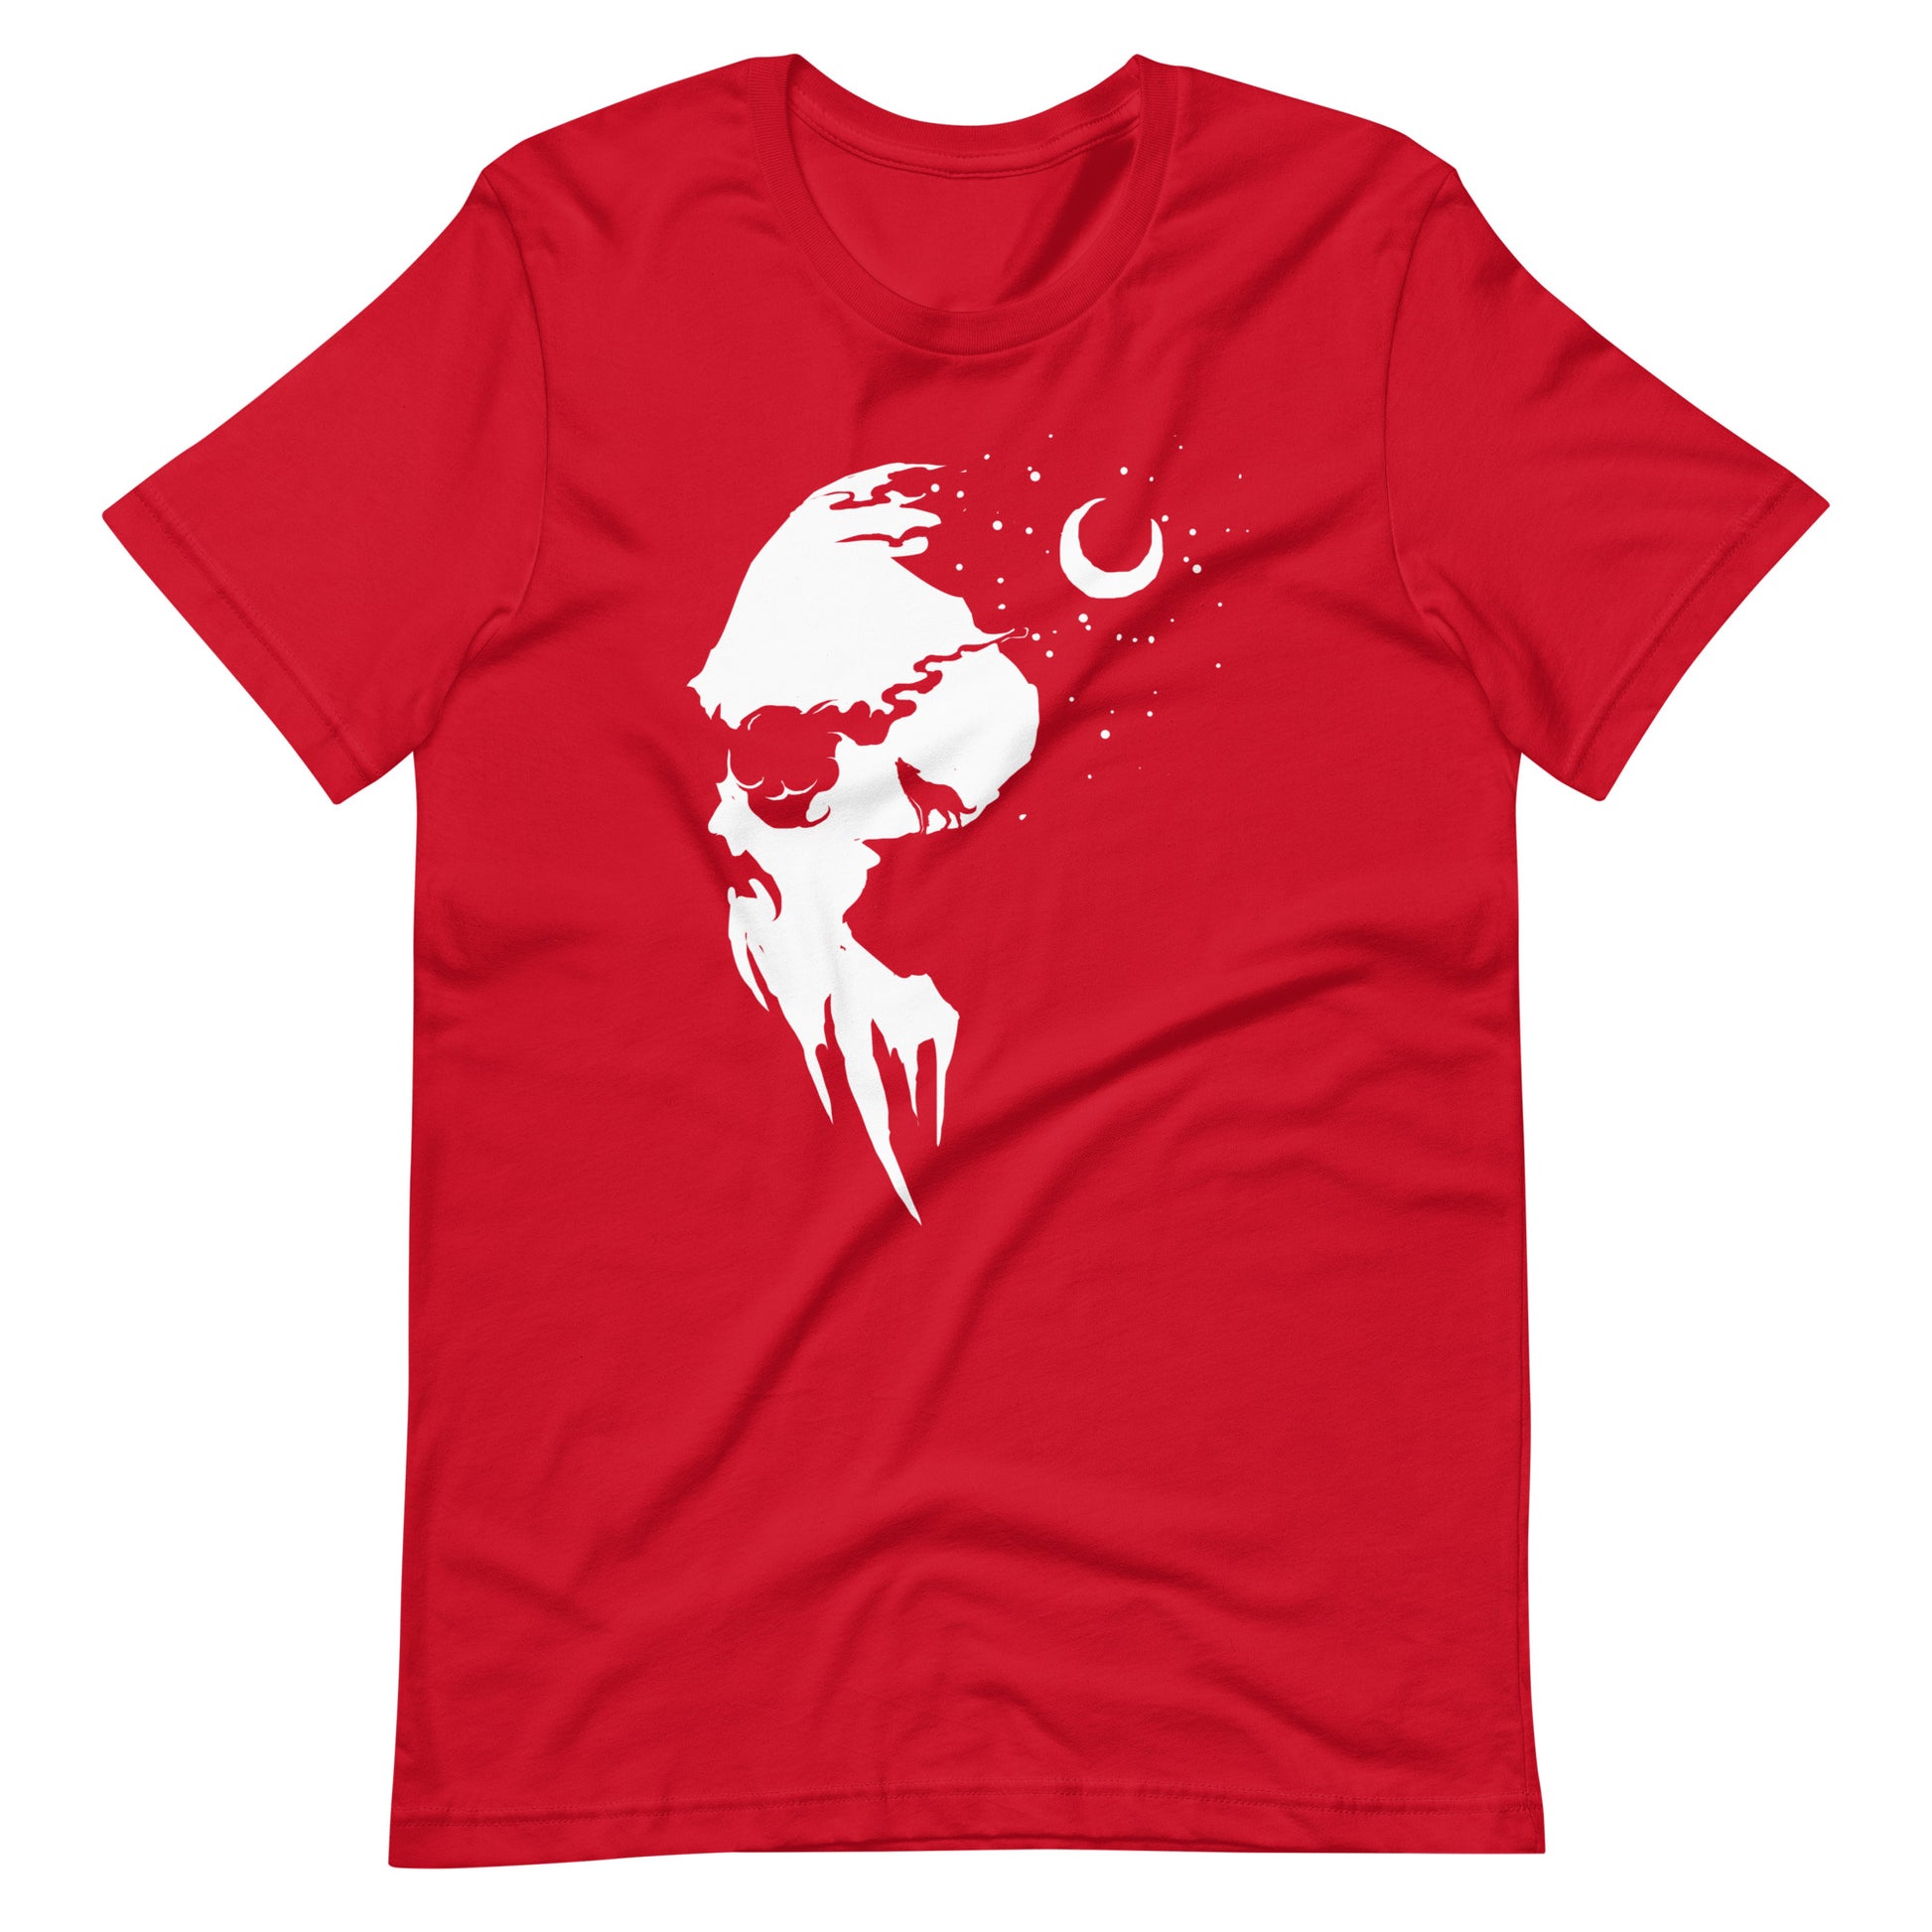 The Night Has Come - Men's t-shirt - Red Front